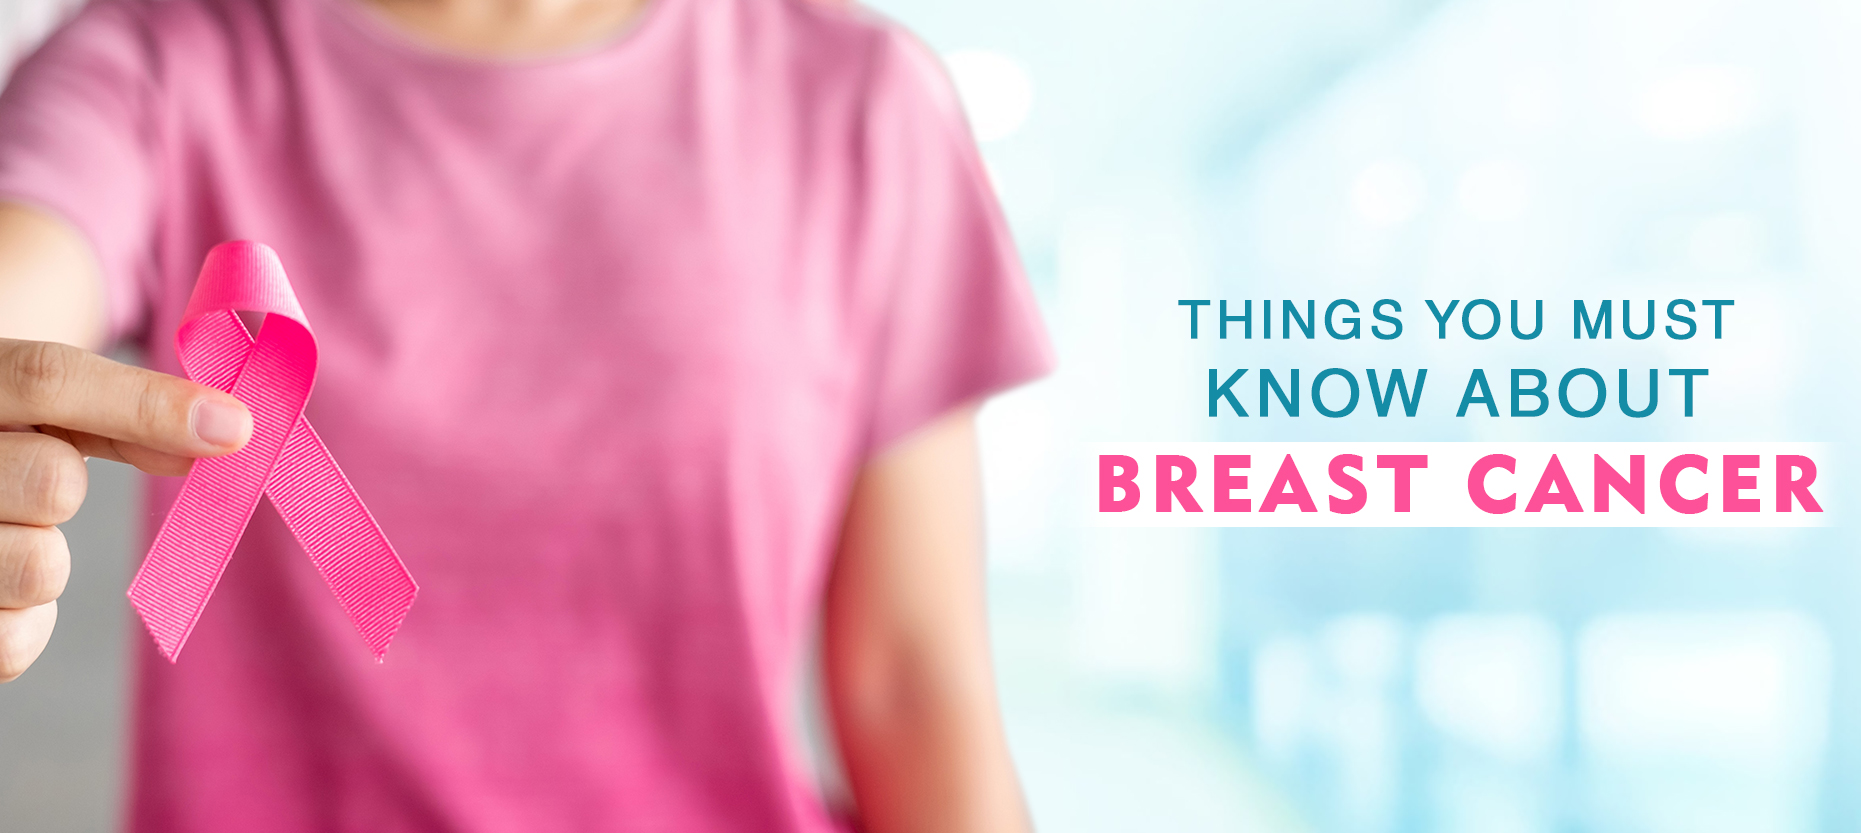 All about Breast Cancer- Early Detection is the Key